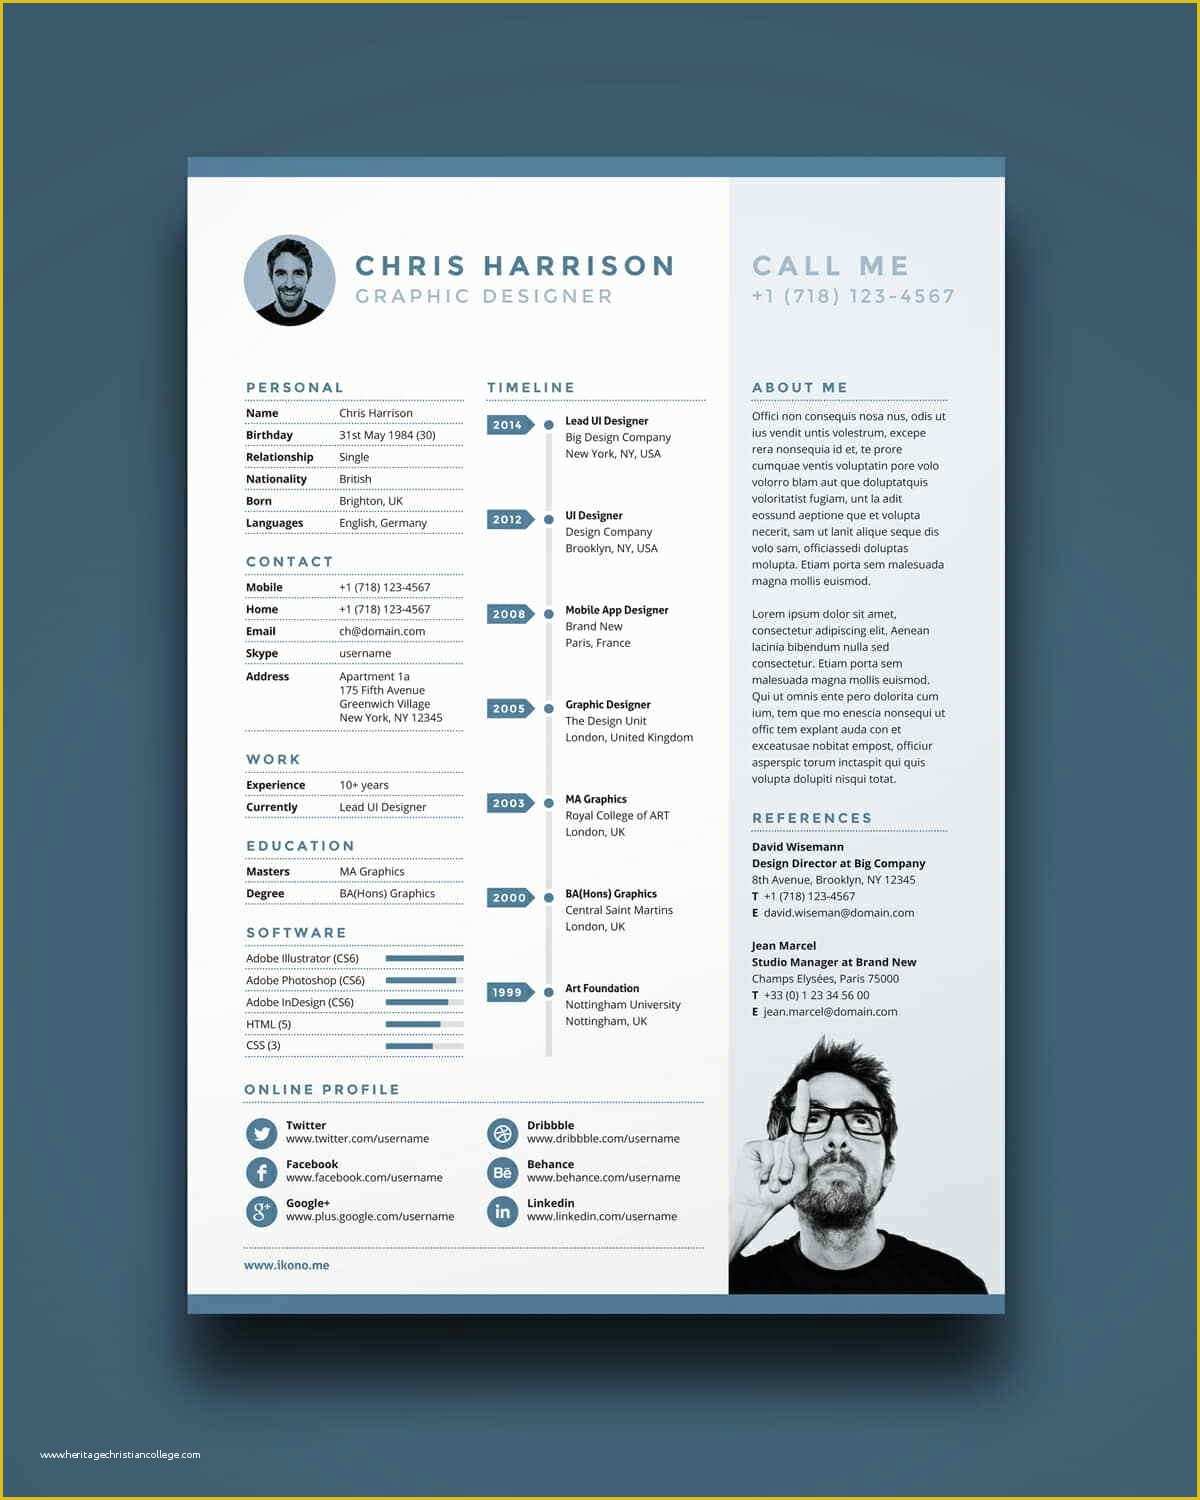 Free Resume Template Download Of Free Resume Templates 17 Free Cv Templates to Download & Use